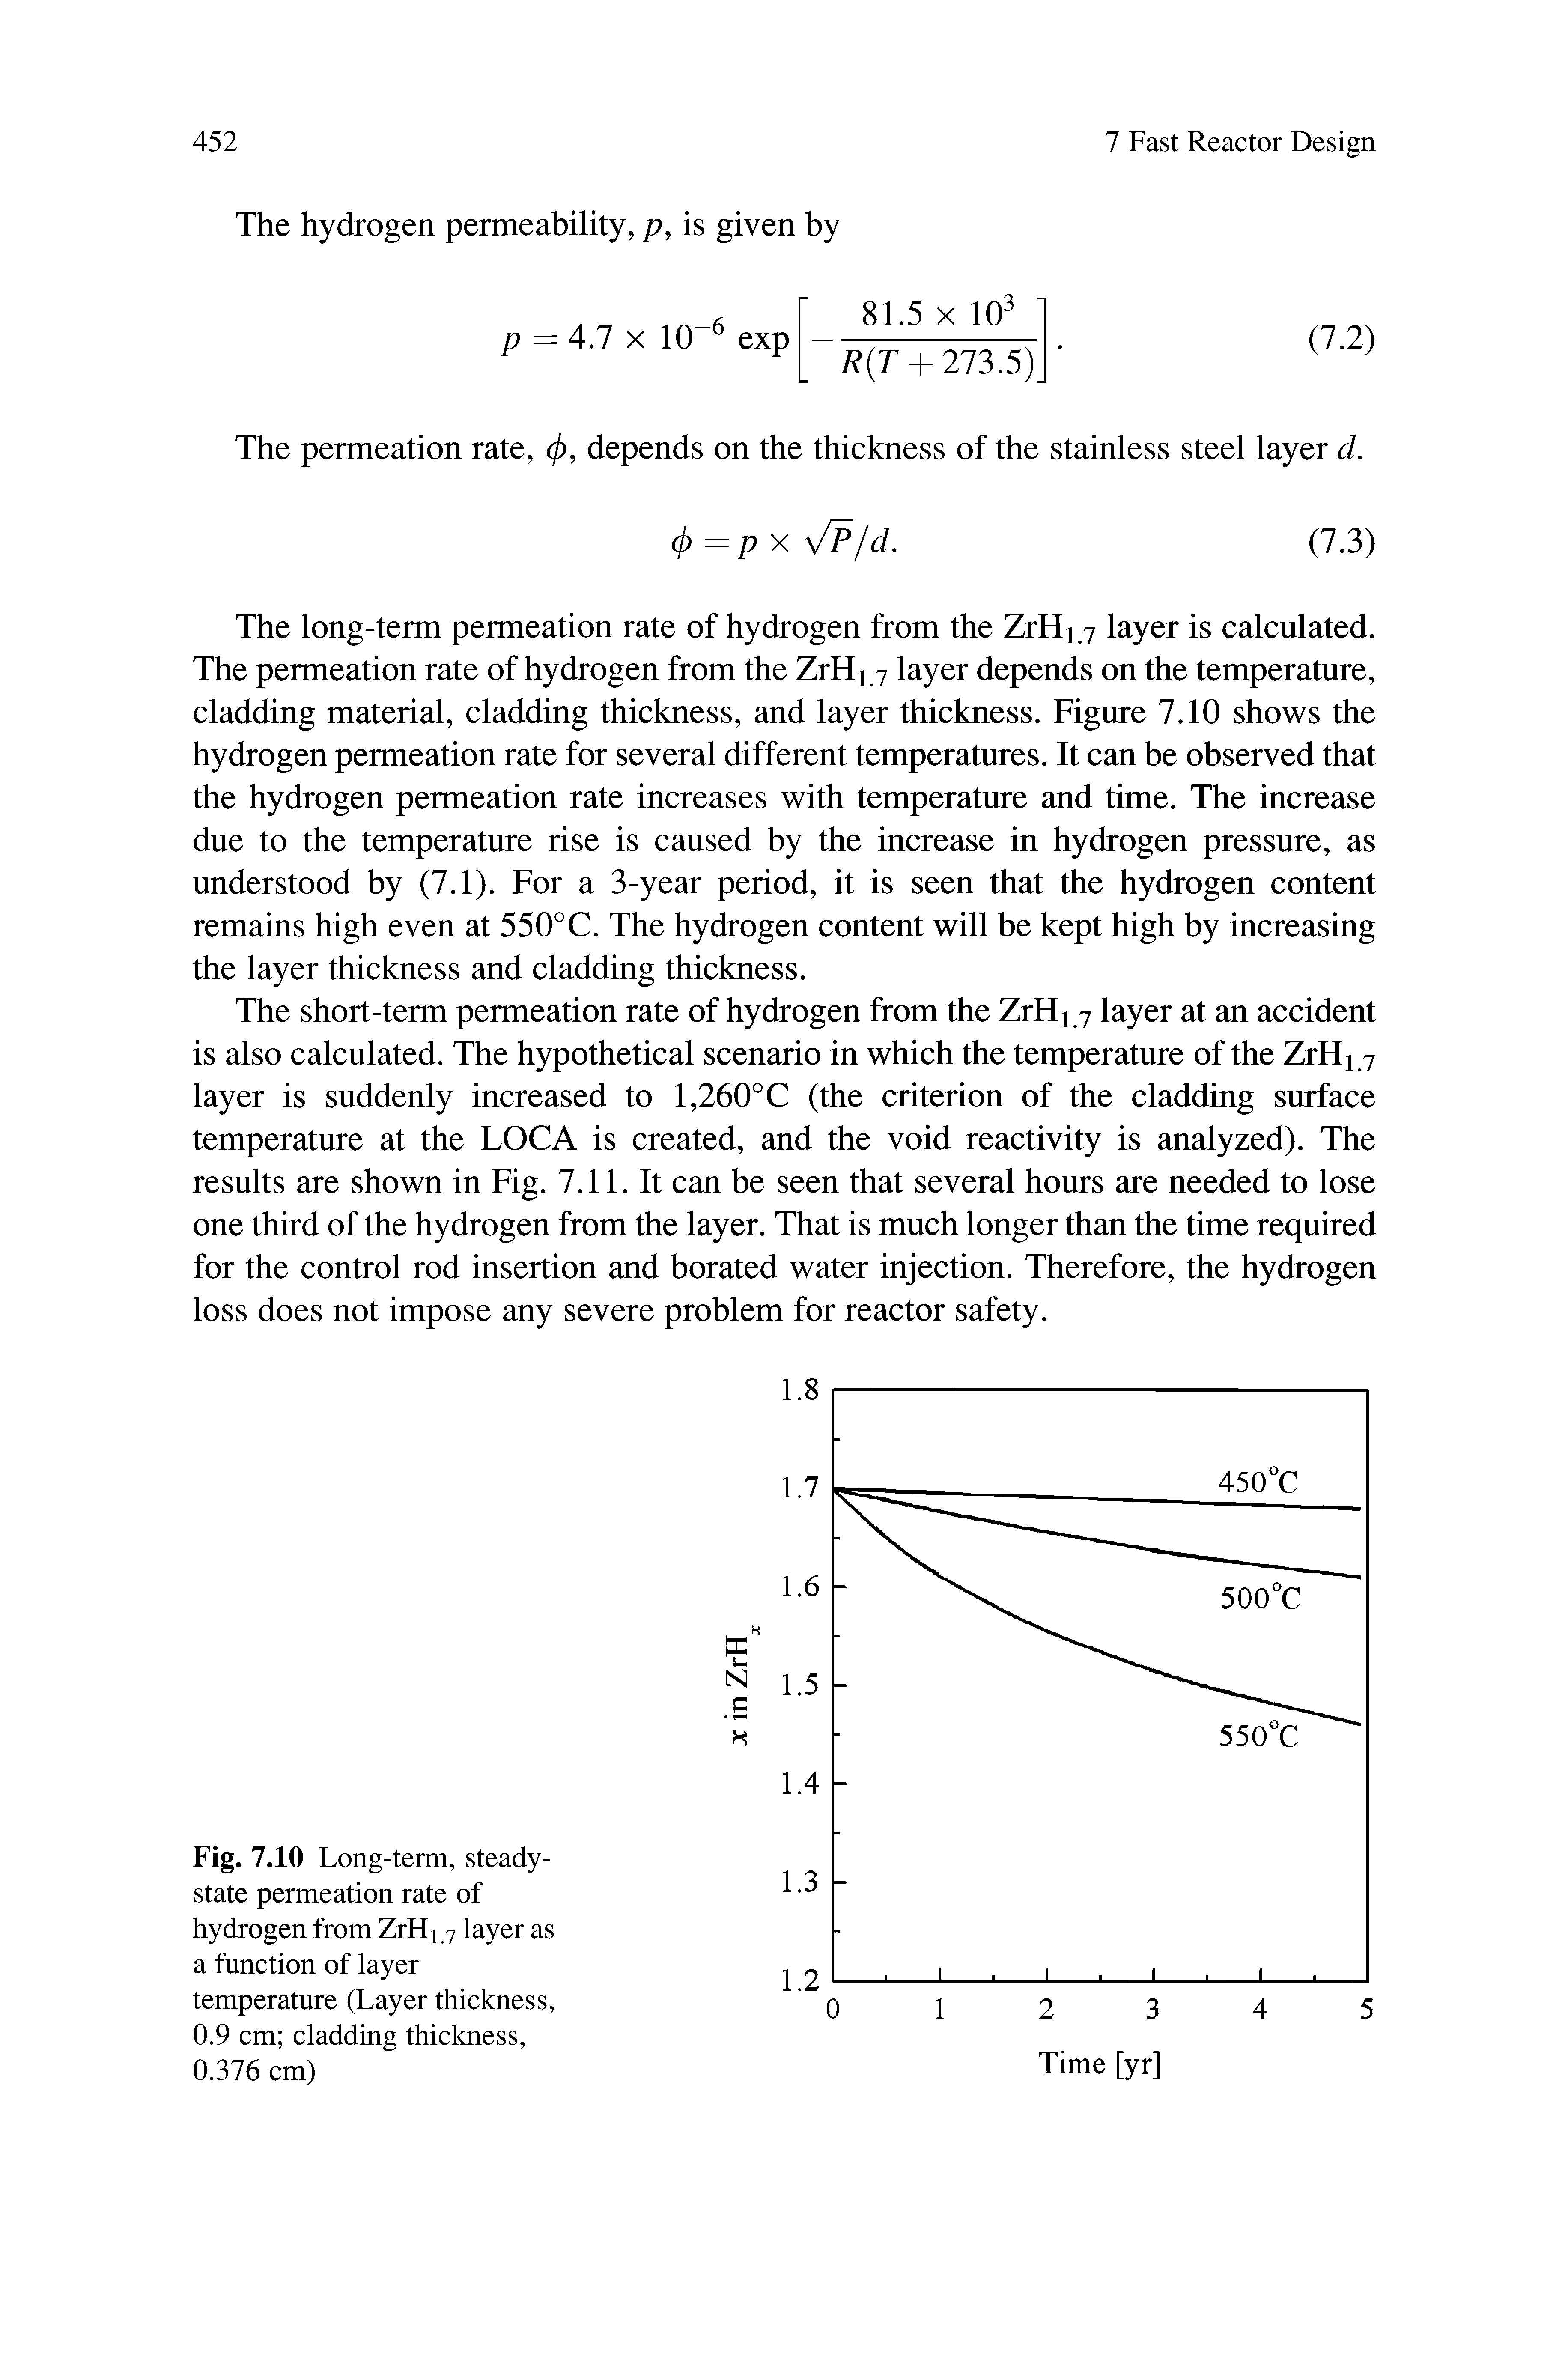 Fig. 7.10 Long-term, steady-state permeation rate of hydrogen from ZrHi 7 layer as a function of layer temperature (Layer thickness, 0.9 cm cladding thickness, 0.376 cm)...